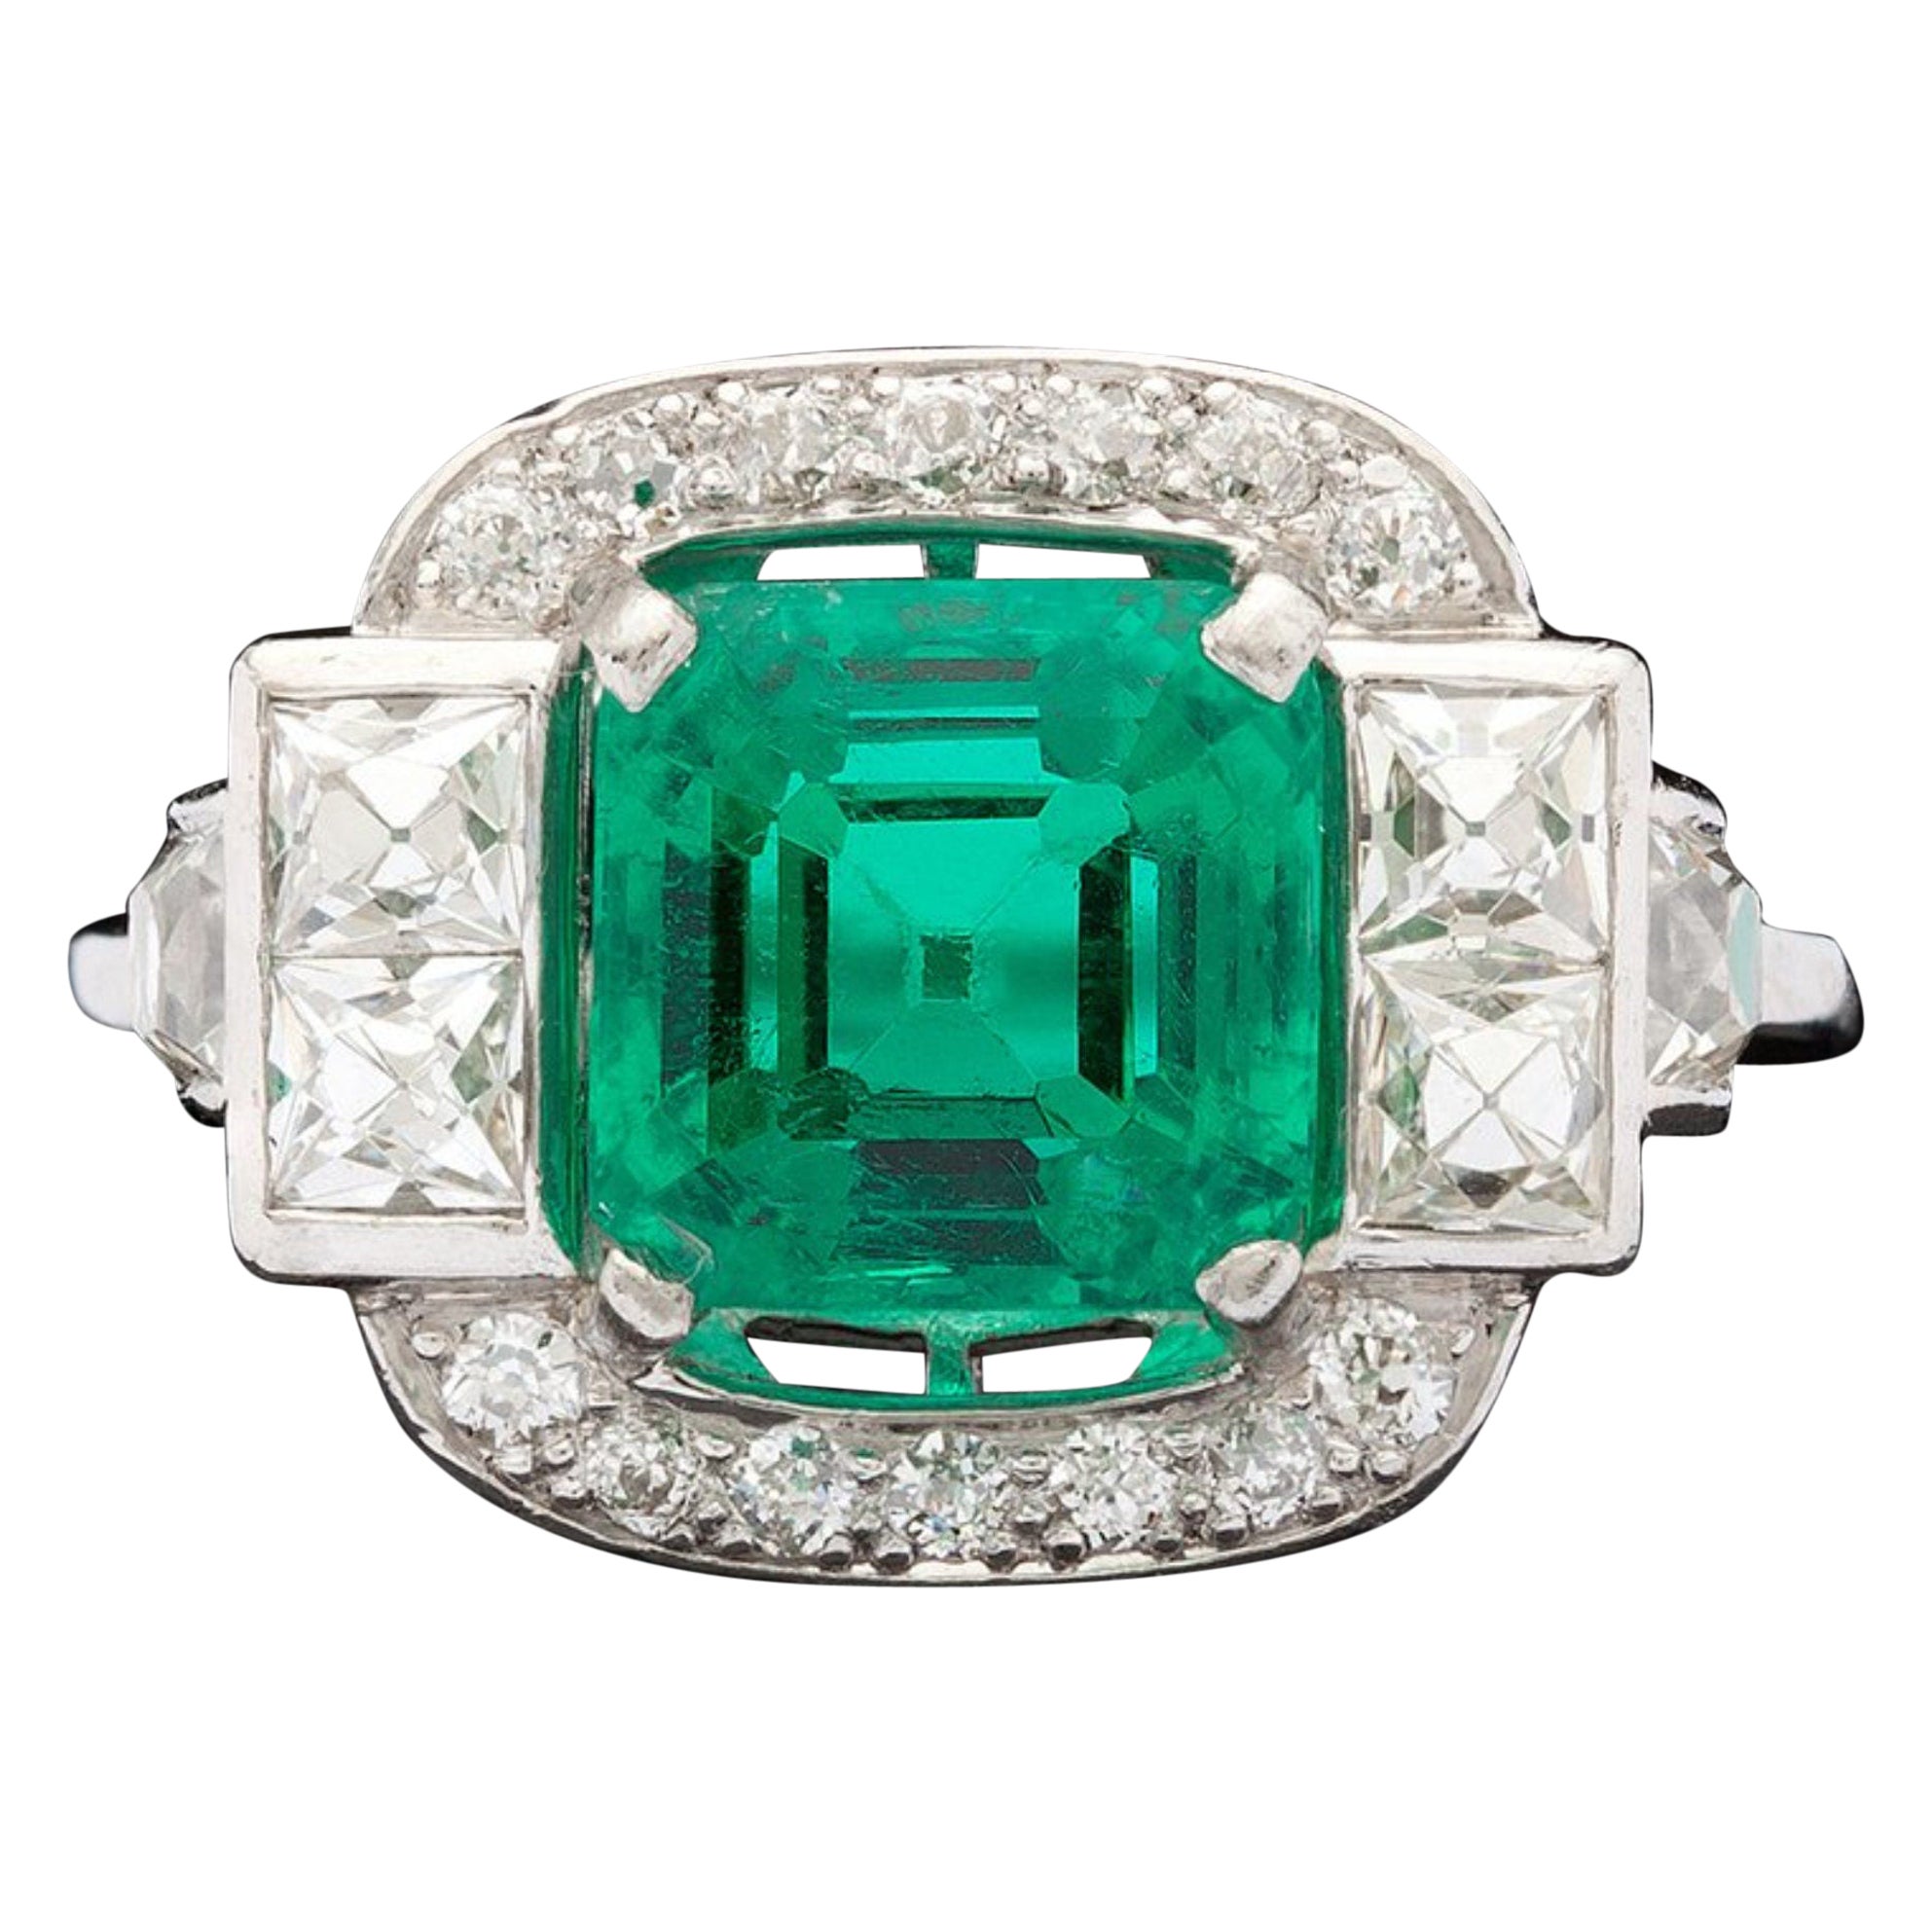 For Sale:  2 Carat Natural Colombian Emerald Engagement Ring White Gold Diamond Bridal Ring